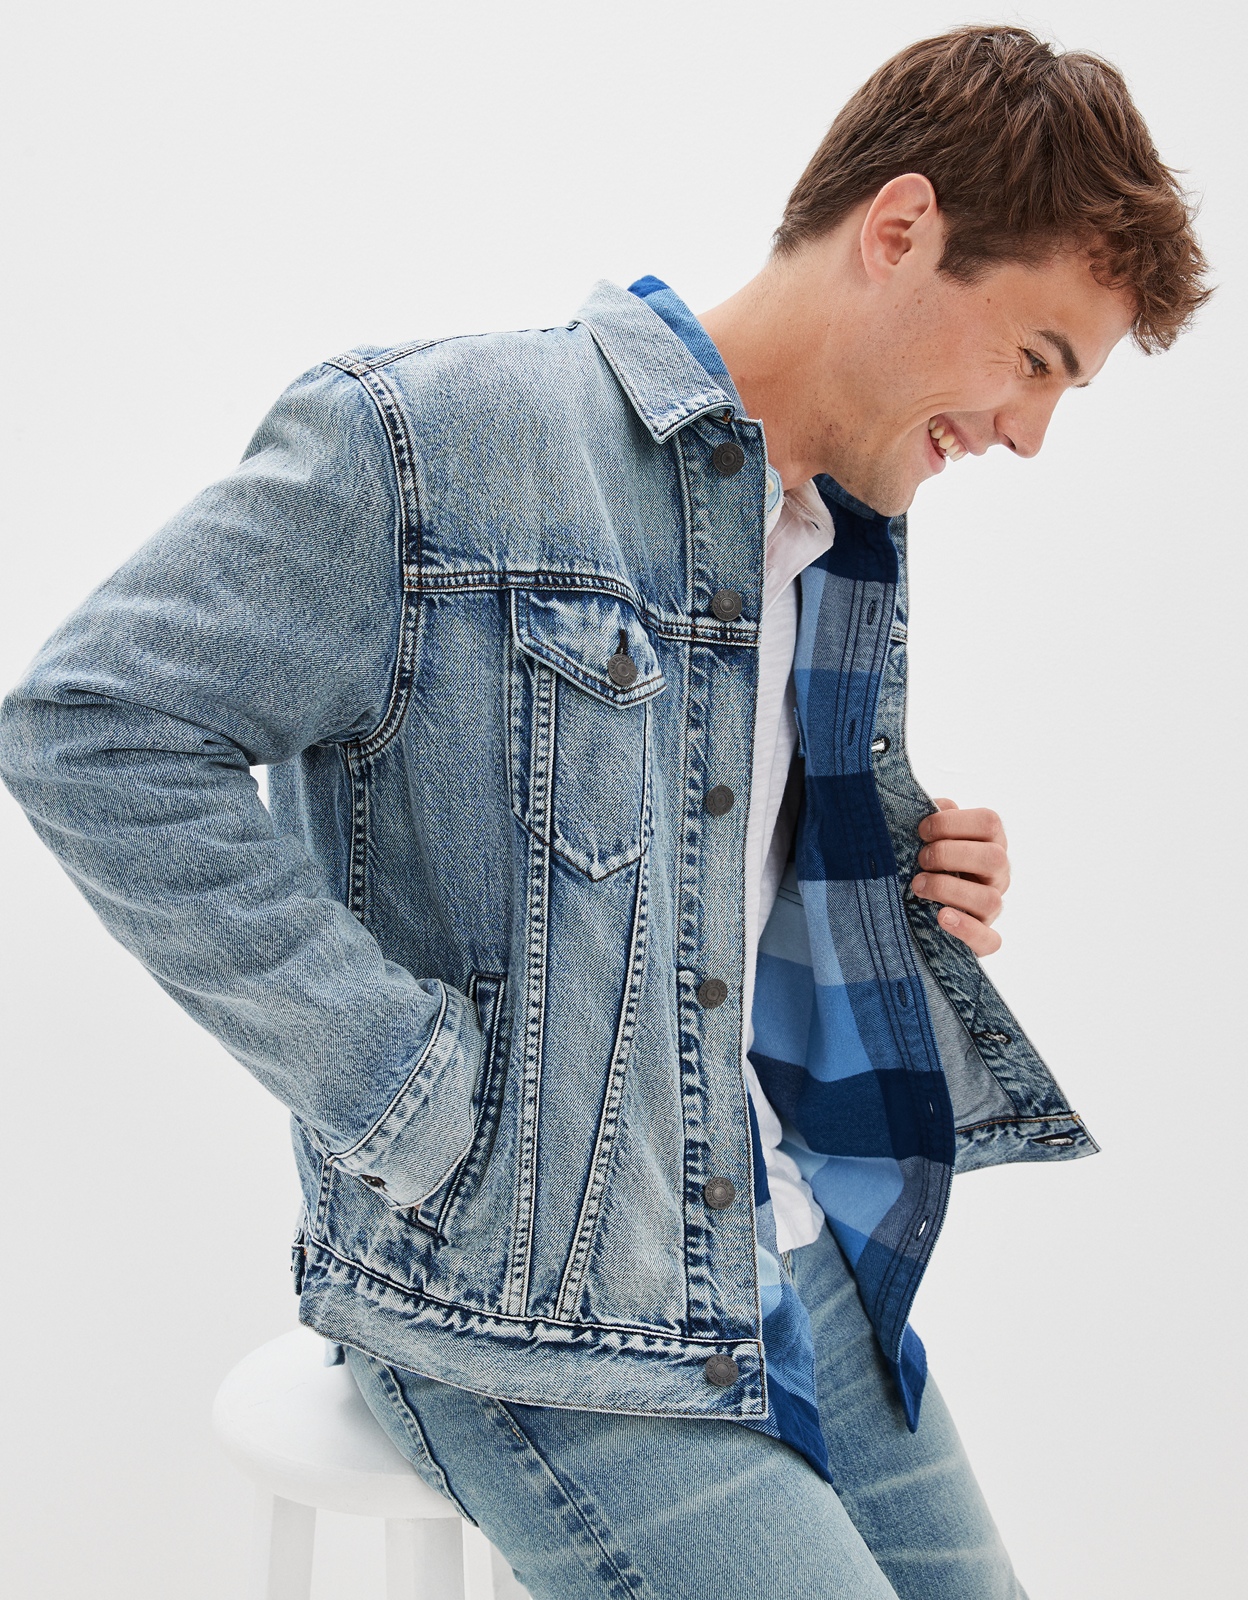 Shop AE Denim Trucker Jacket online | American Eagle Outfitters